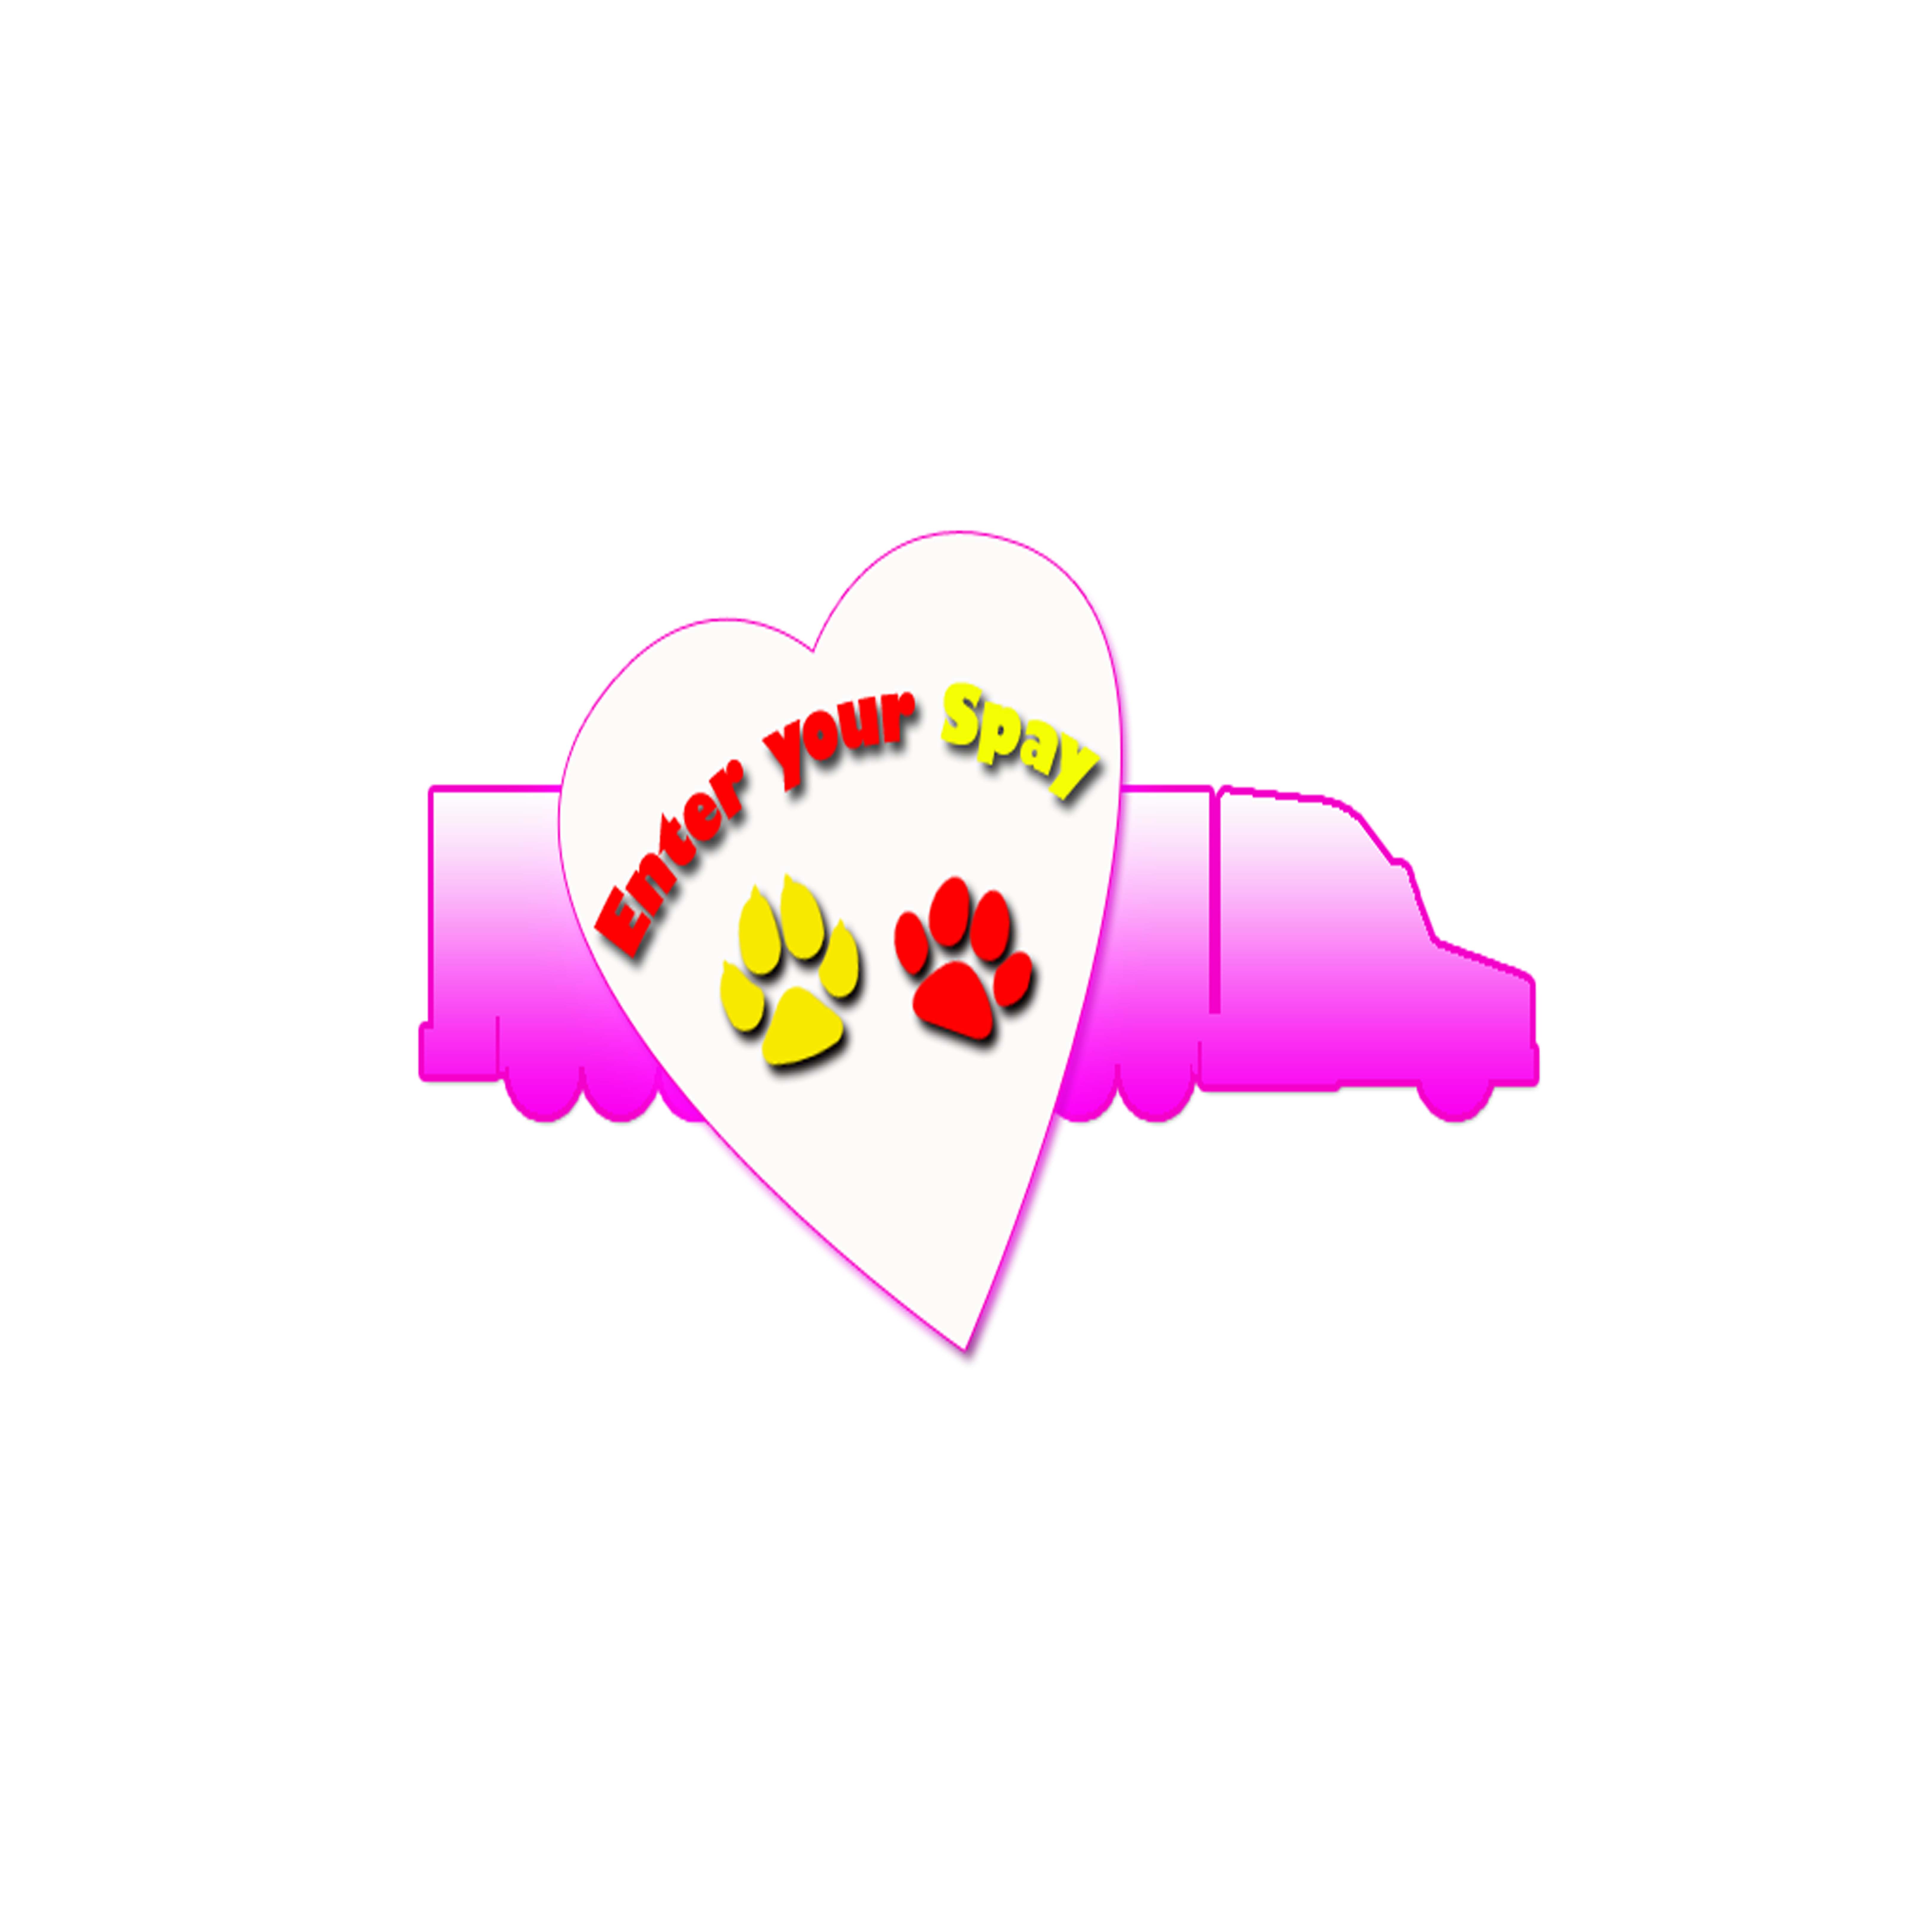 Logo for a spay business with highlighted text cover image.